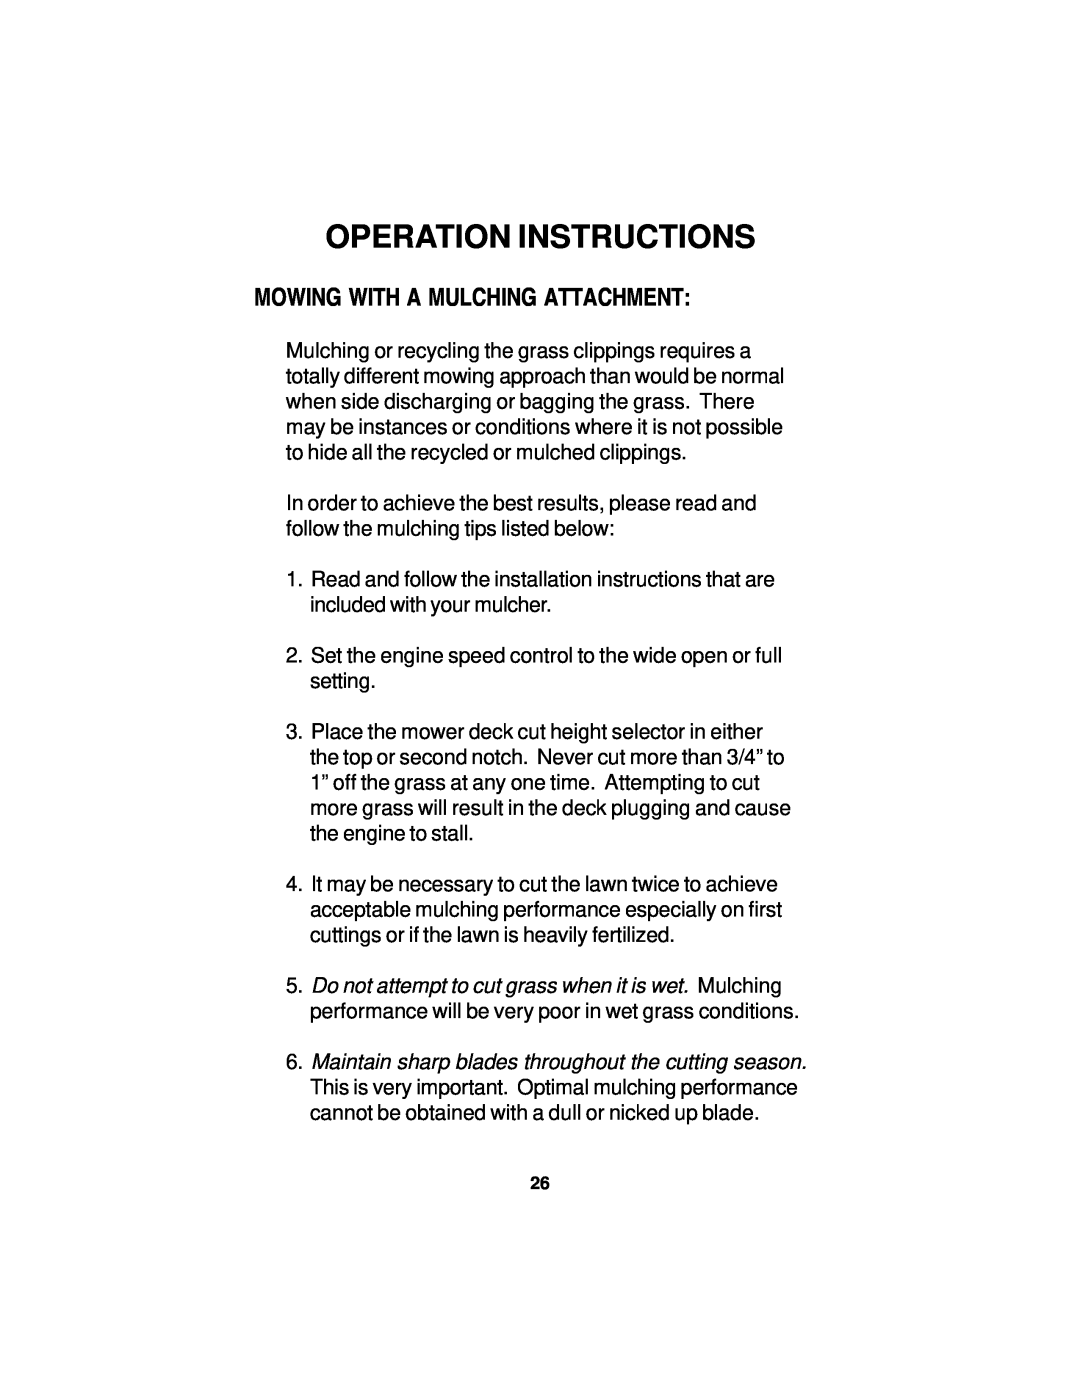 Dixon 14295-0804 manual Mowing With A Mulching Attachment, Operation Instructions 